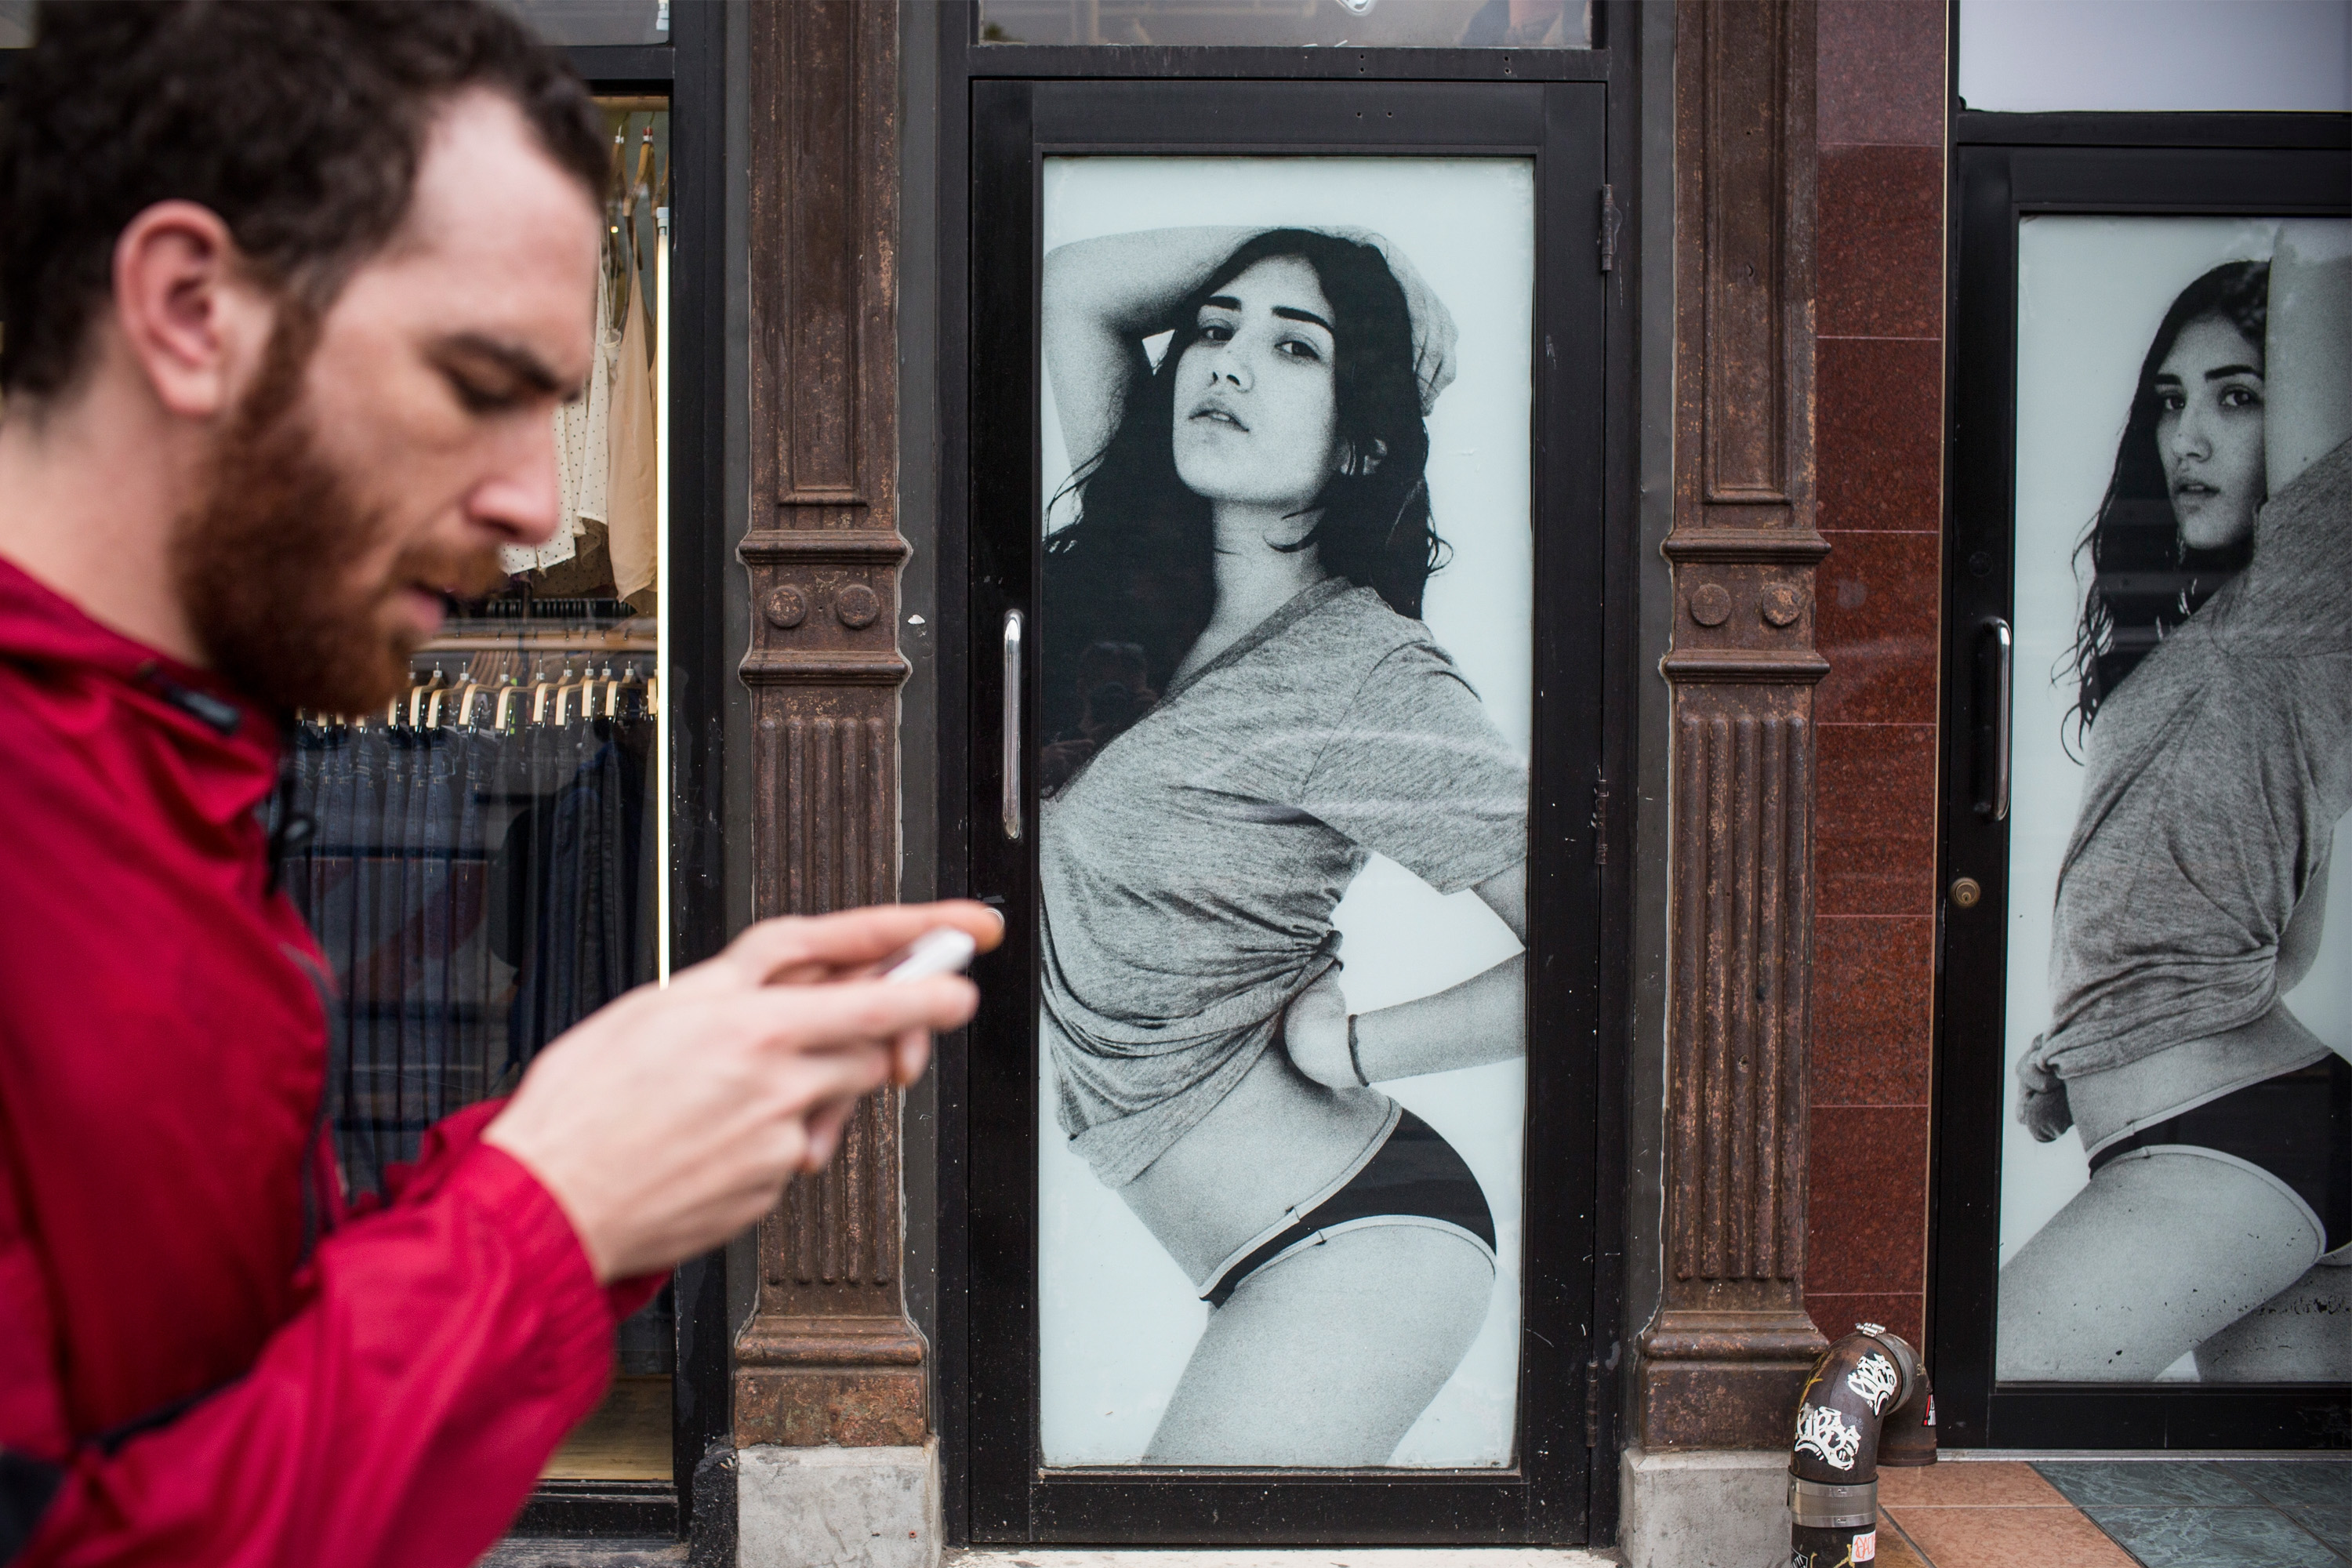 A man walks past an American Apparel store on June 19, 2014 in New York City. (Andrew Burton&mdash;Getty Images)